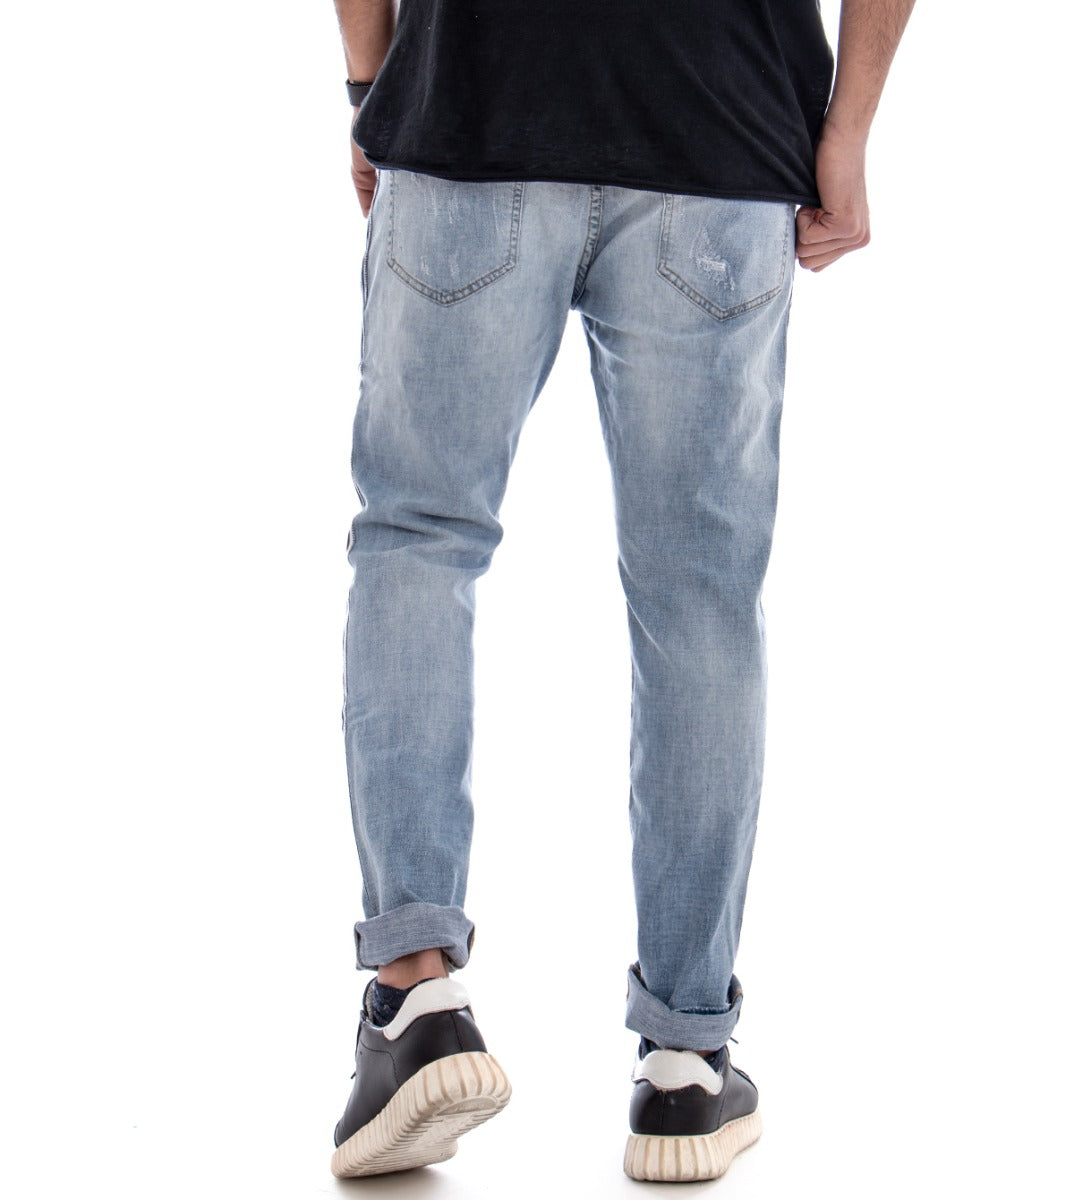 Pantaloni Jeans Uomo Slim Fit Stone Washed Cinque Tasche Rotture GIOSAL-P2258A